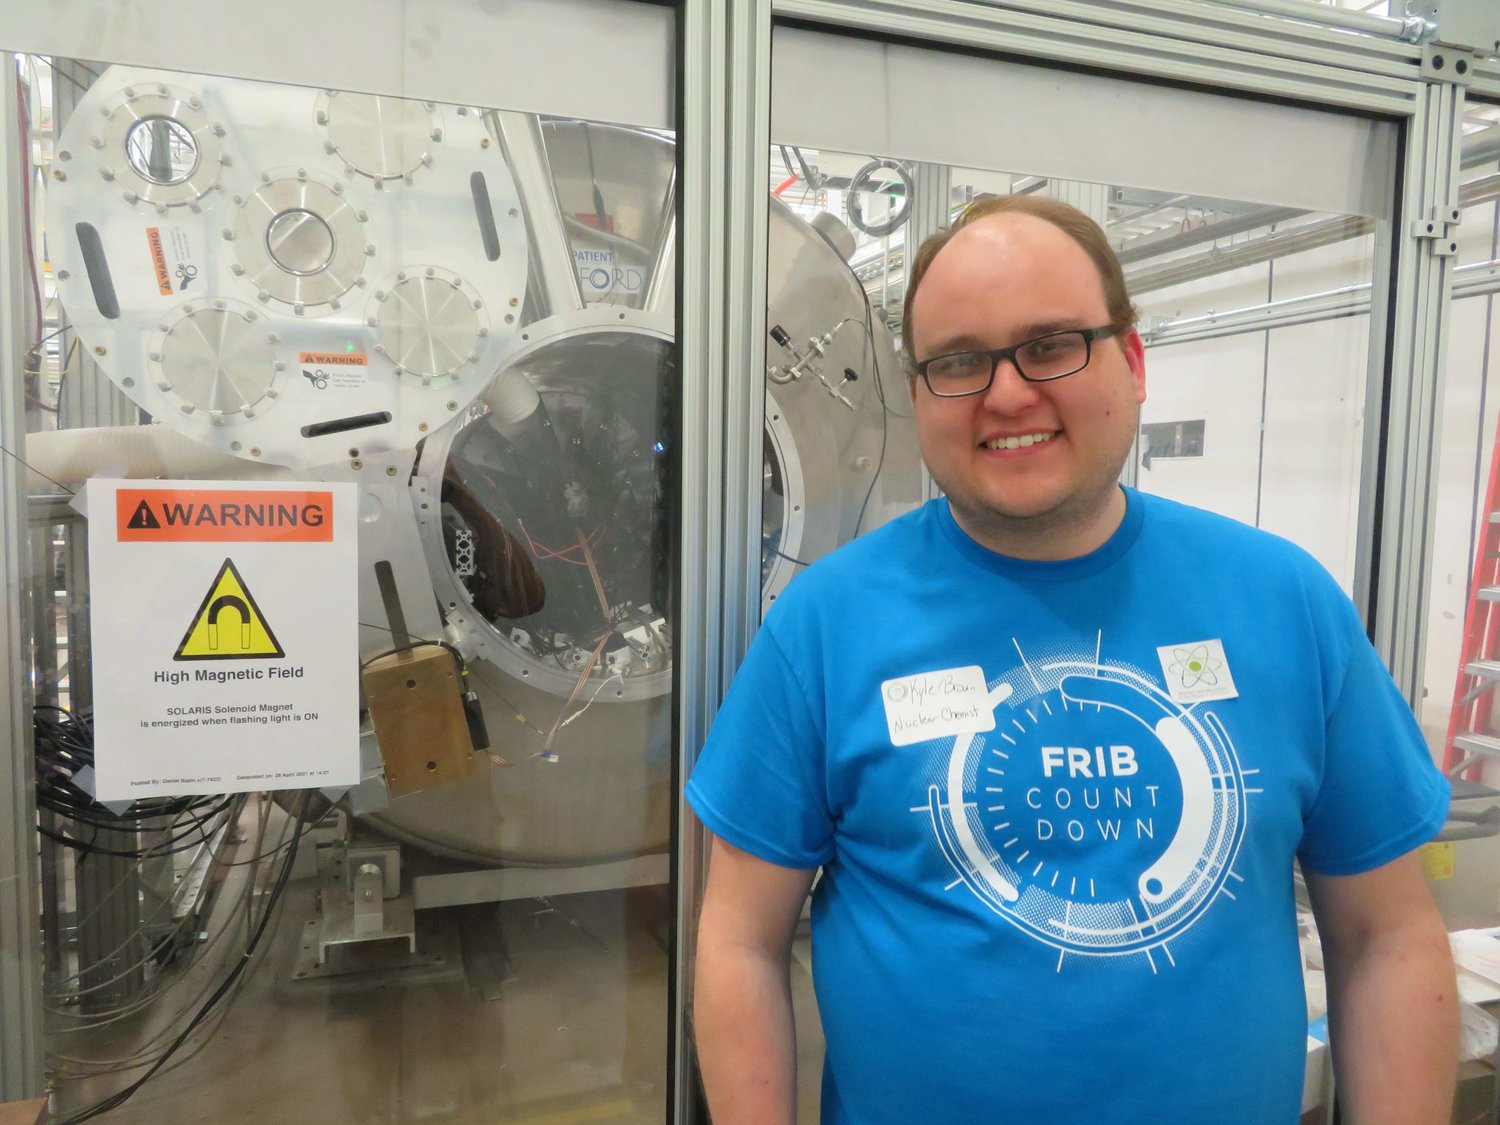 At the April 23 “FRIB Countdown” open house, MSU chemistry researcher Kyle Brown showed off Solaris, a re-purposed medical MRI machine that will photograph and identify isotopes as they come out of the FRIB’s accelerator.